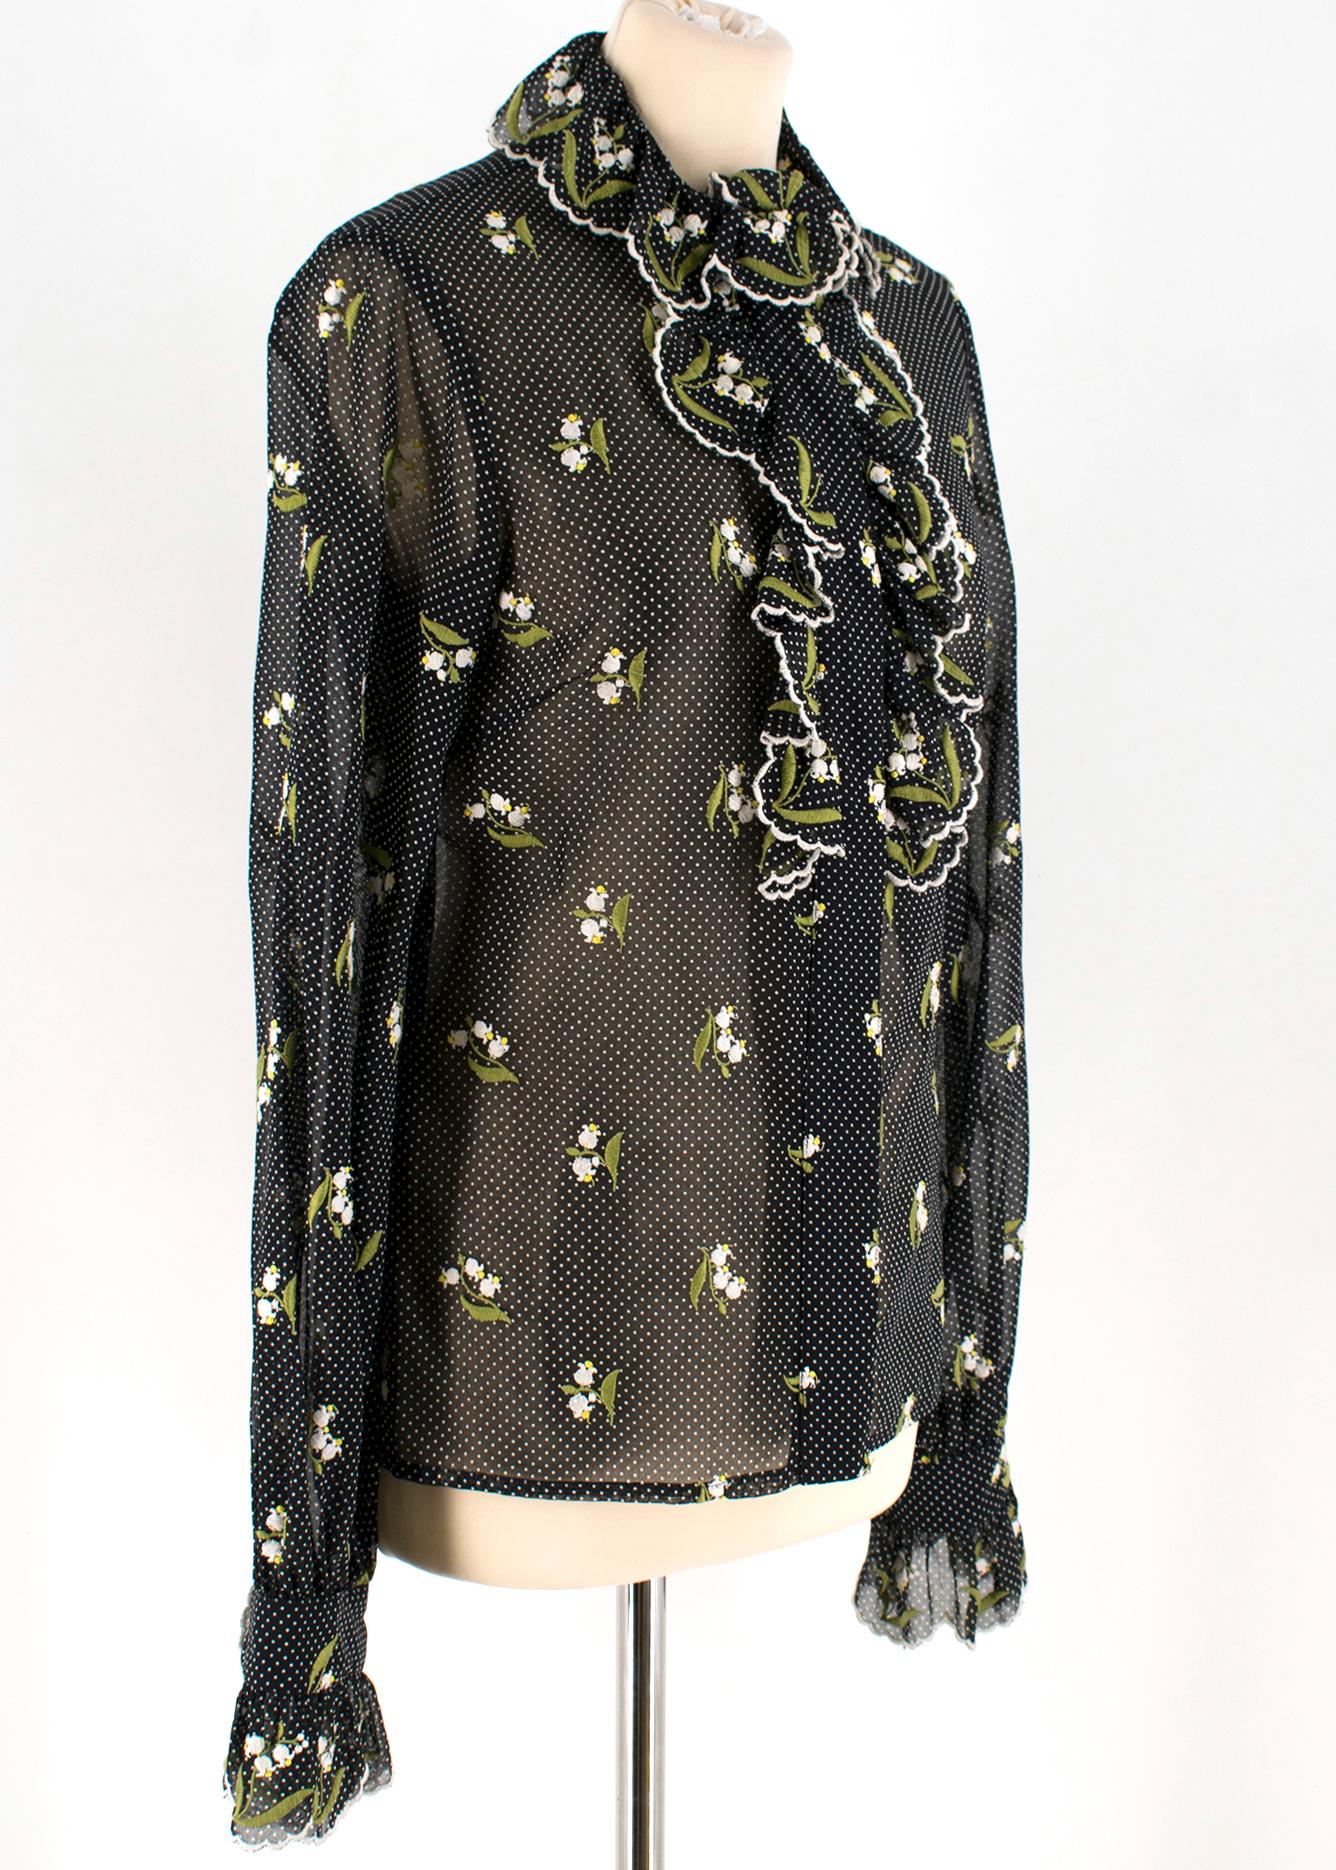 Andrew GN Black Polka Dot Embroidered Shirt

- black sheer shirt
- long sleeve
- white polka dot embellishment 
- thread flowers embellishment 
- ruffle collar and trim
- hidden push button fastening

Please note, these items are pre-owned and may